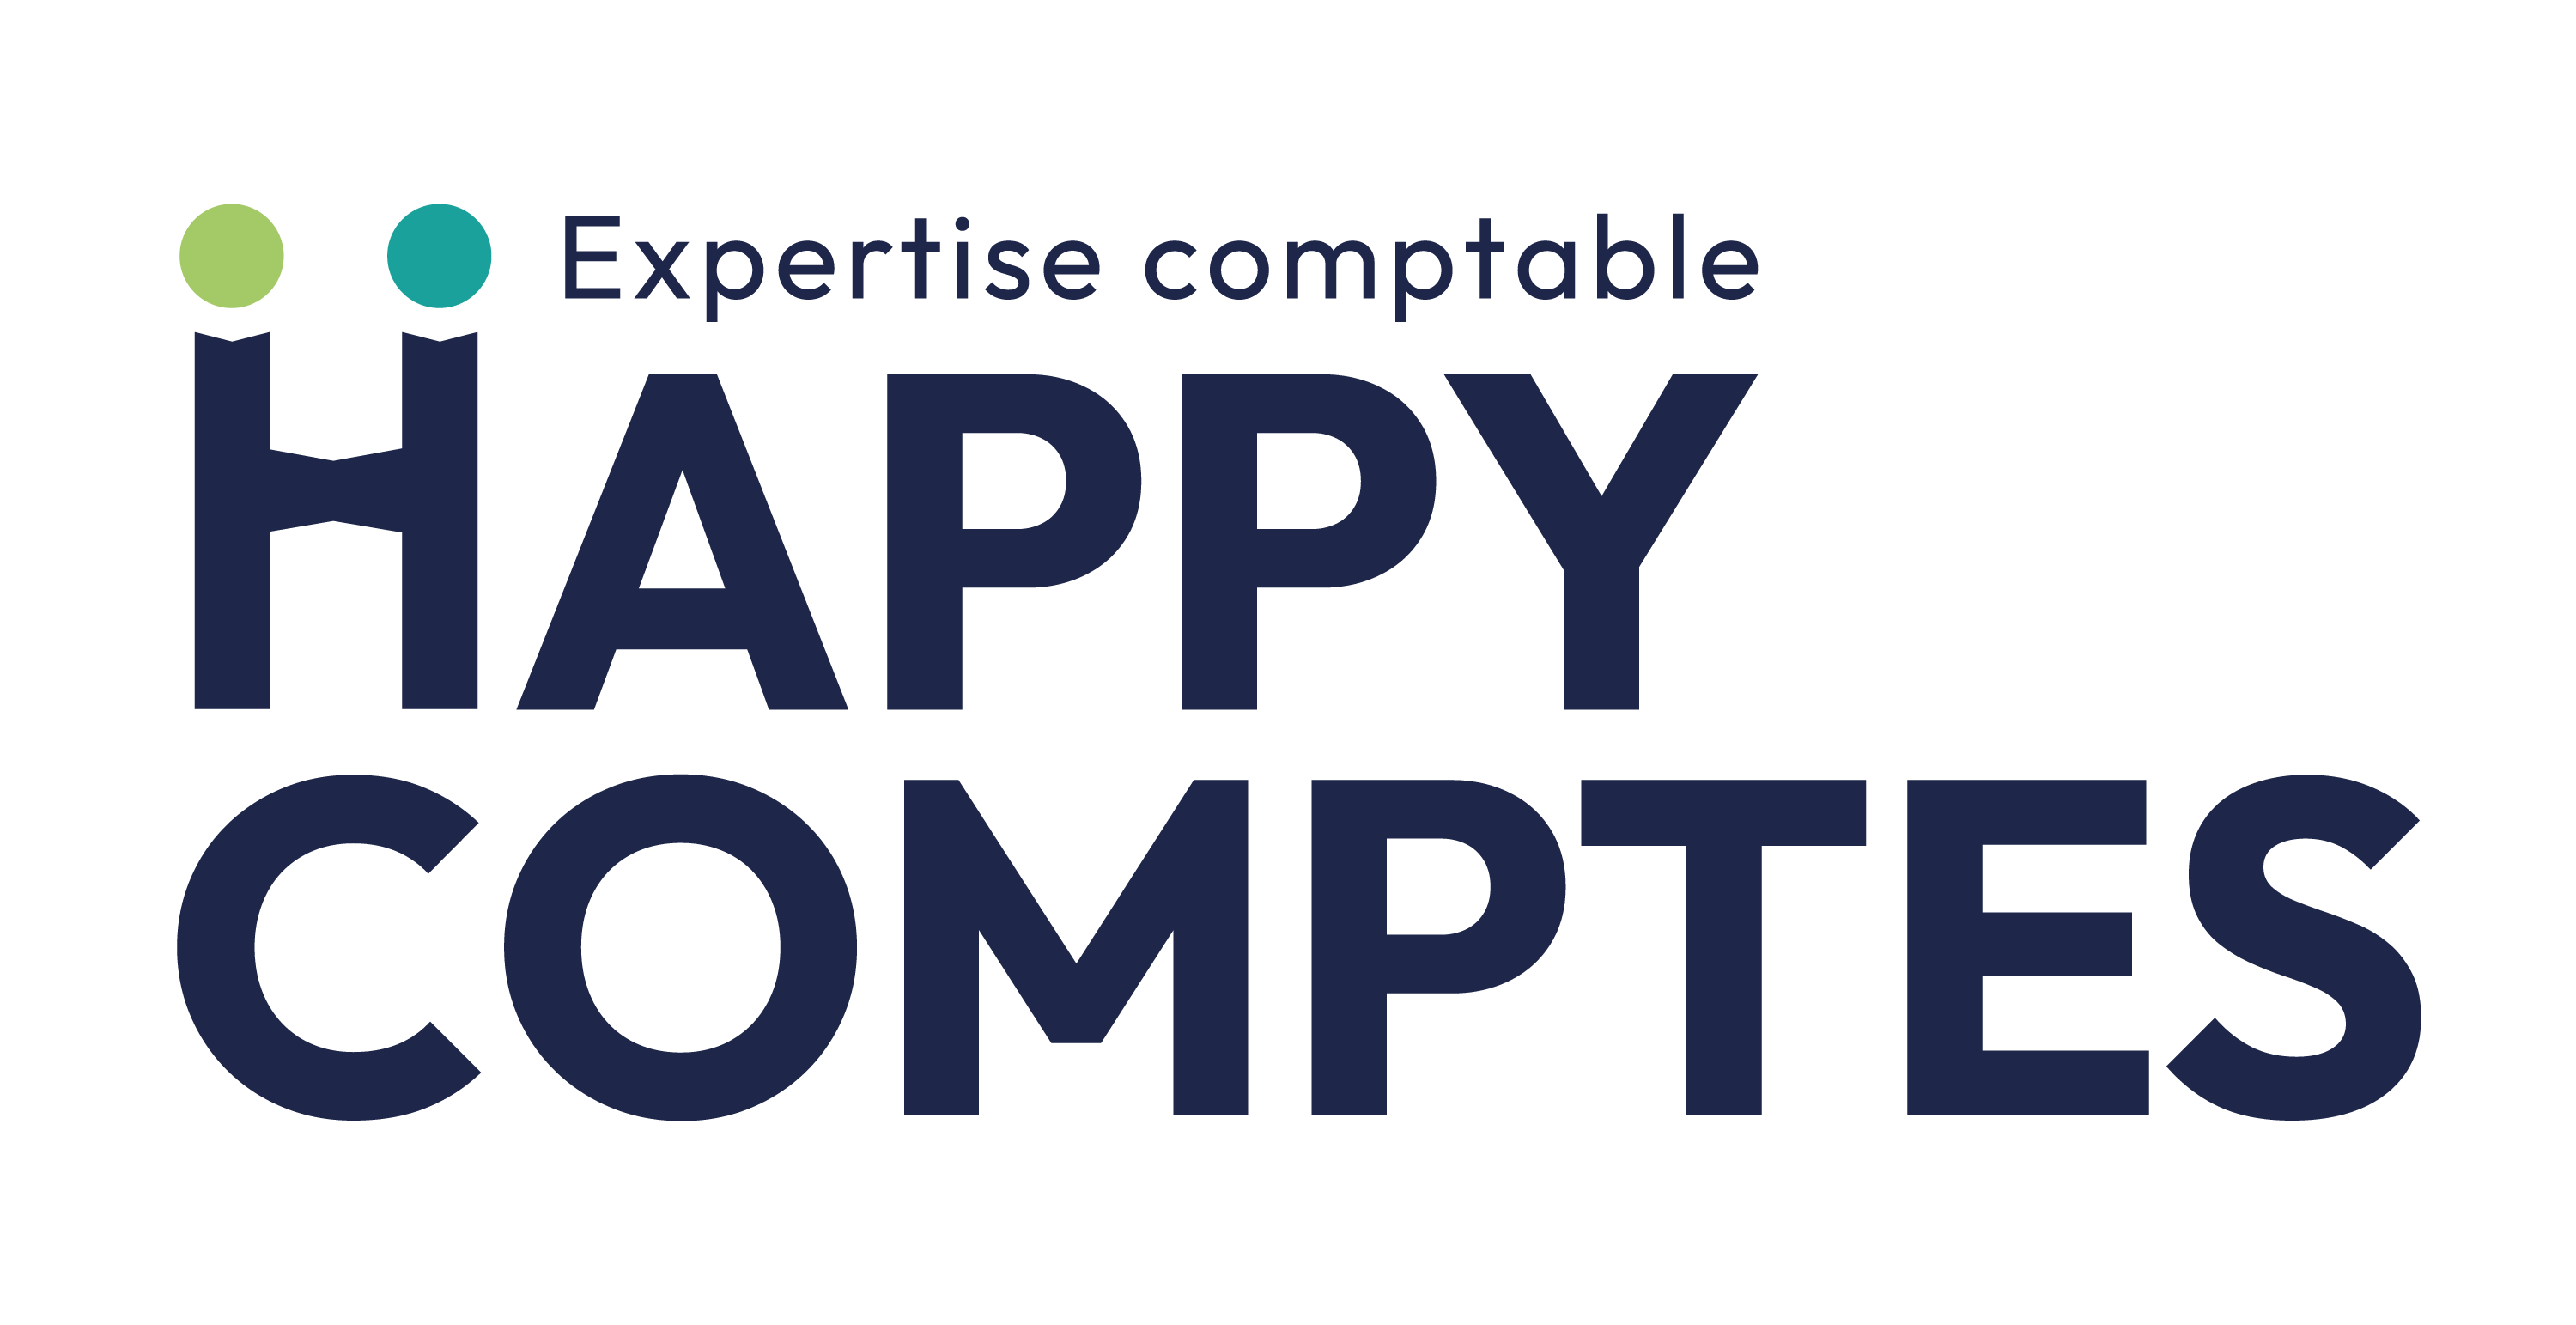 HappyComptes – Expertise comptable Poitiers Logo